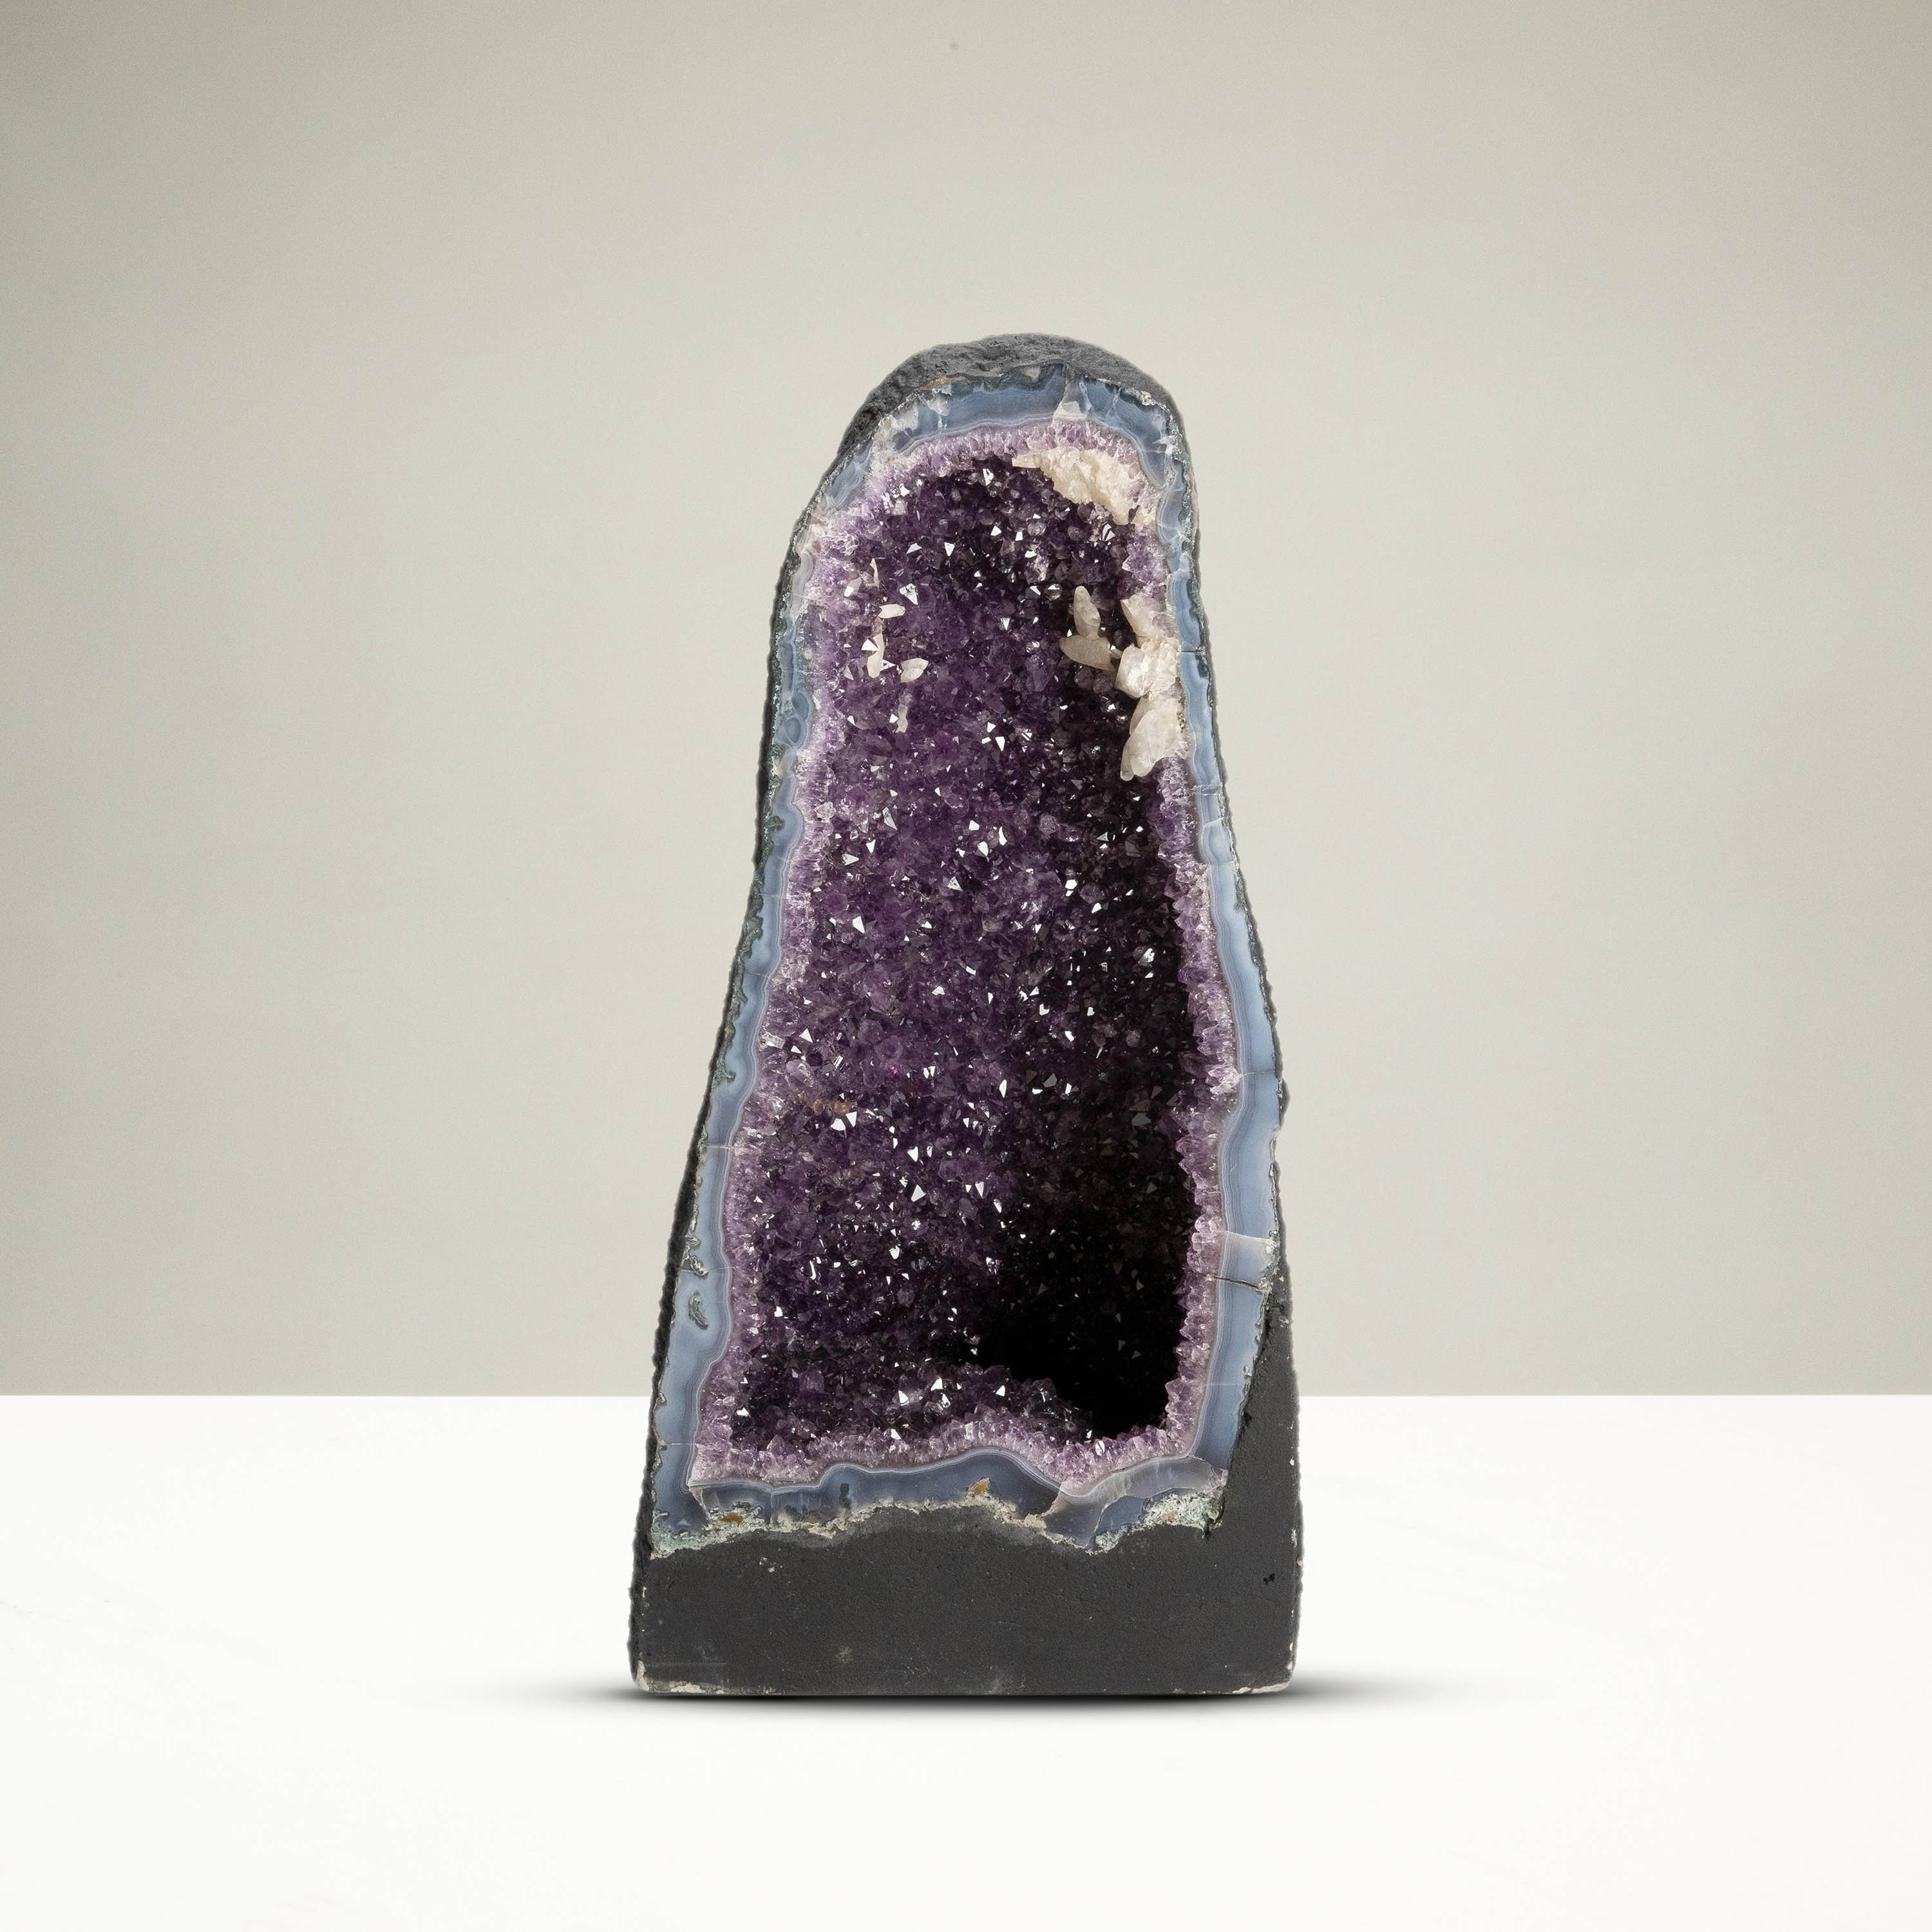 Kalifano Amethyst Amethyst Geode Cathedral - 27" / 119 lbs BAG18000.007